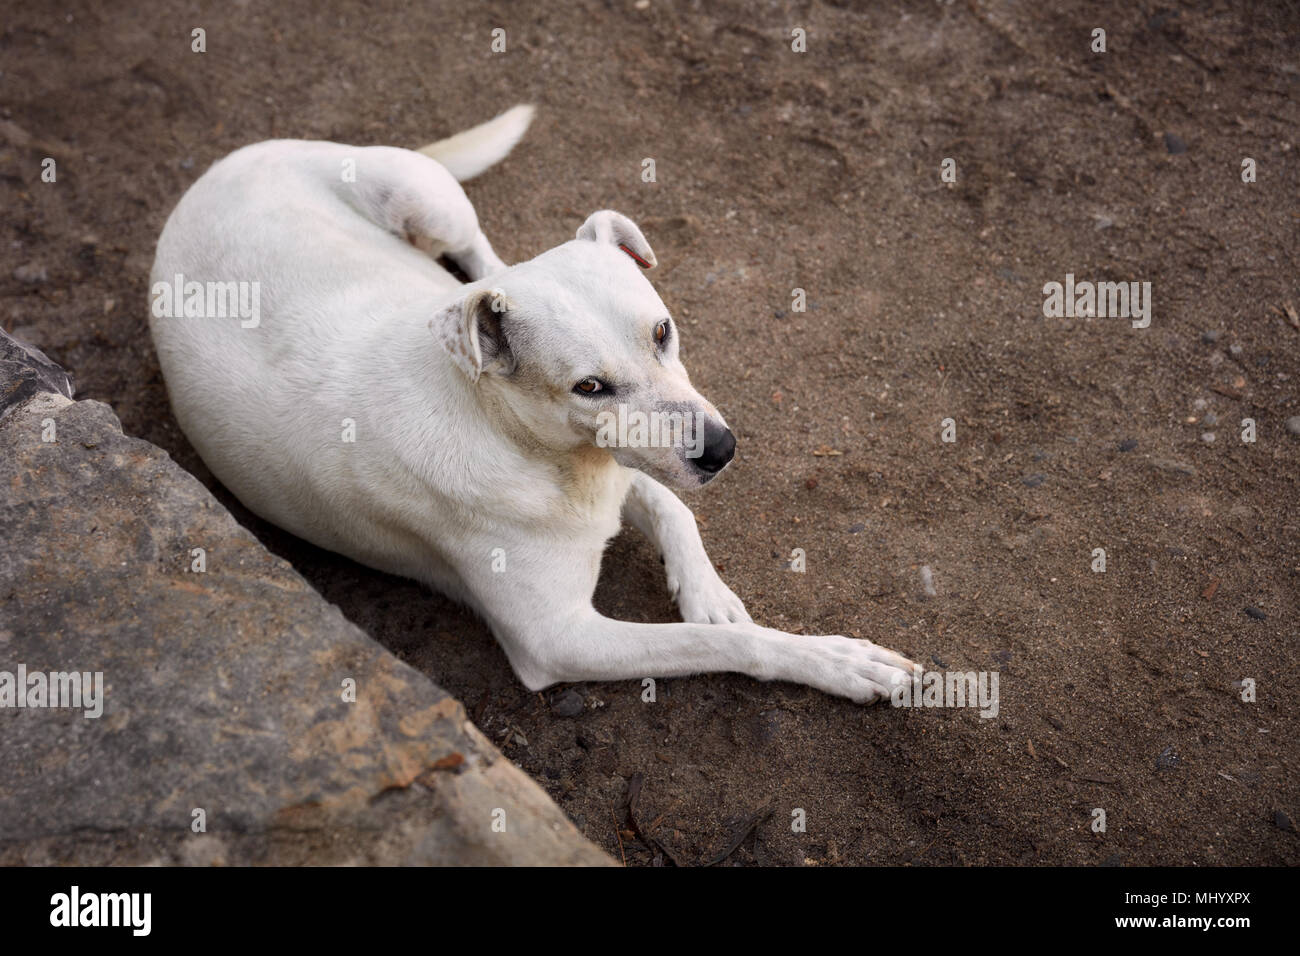 Up down view of a beautiful and clean white stray dog lying on a sandy street looking above Stock Photo